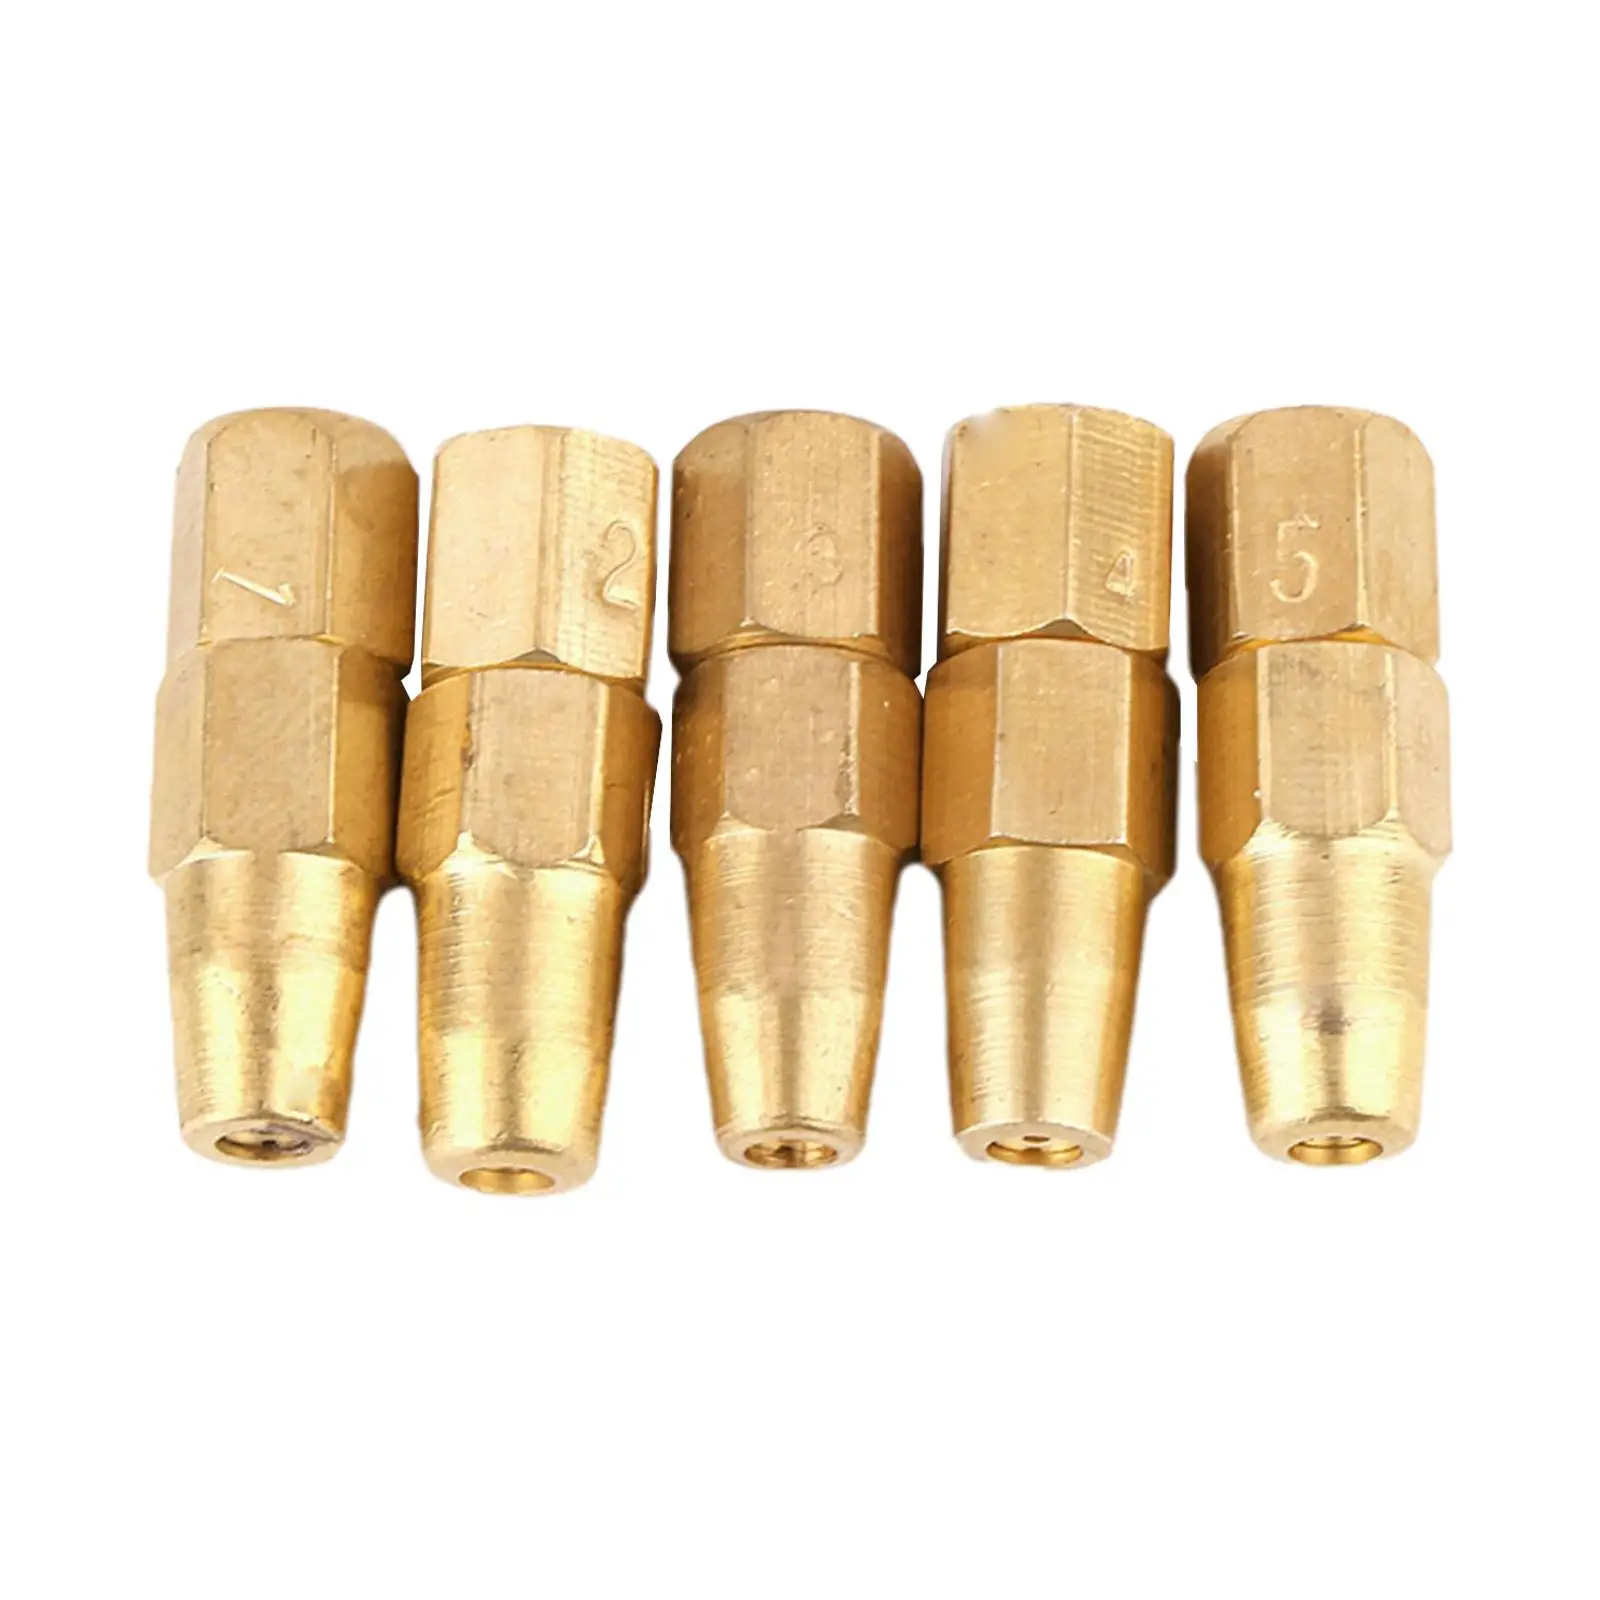 5x Welding Nozzle Tips Practical 0.5mm 0.6mm 0.7mm 0.8mm 0.9mm for H01-2 Welding Tools Holder Accessory Replacement Repair Parts